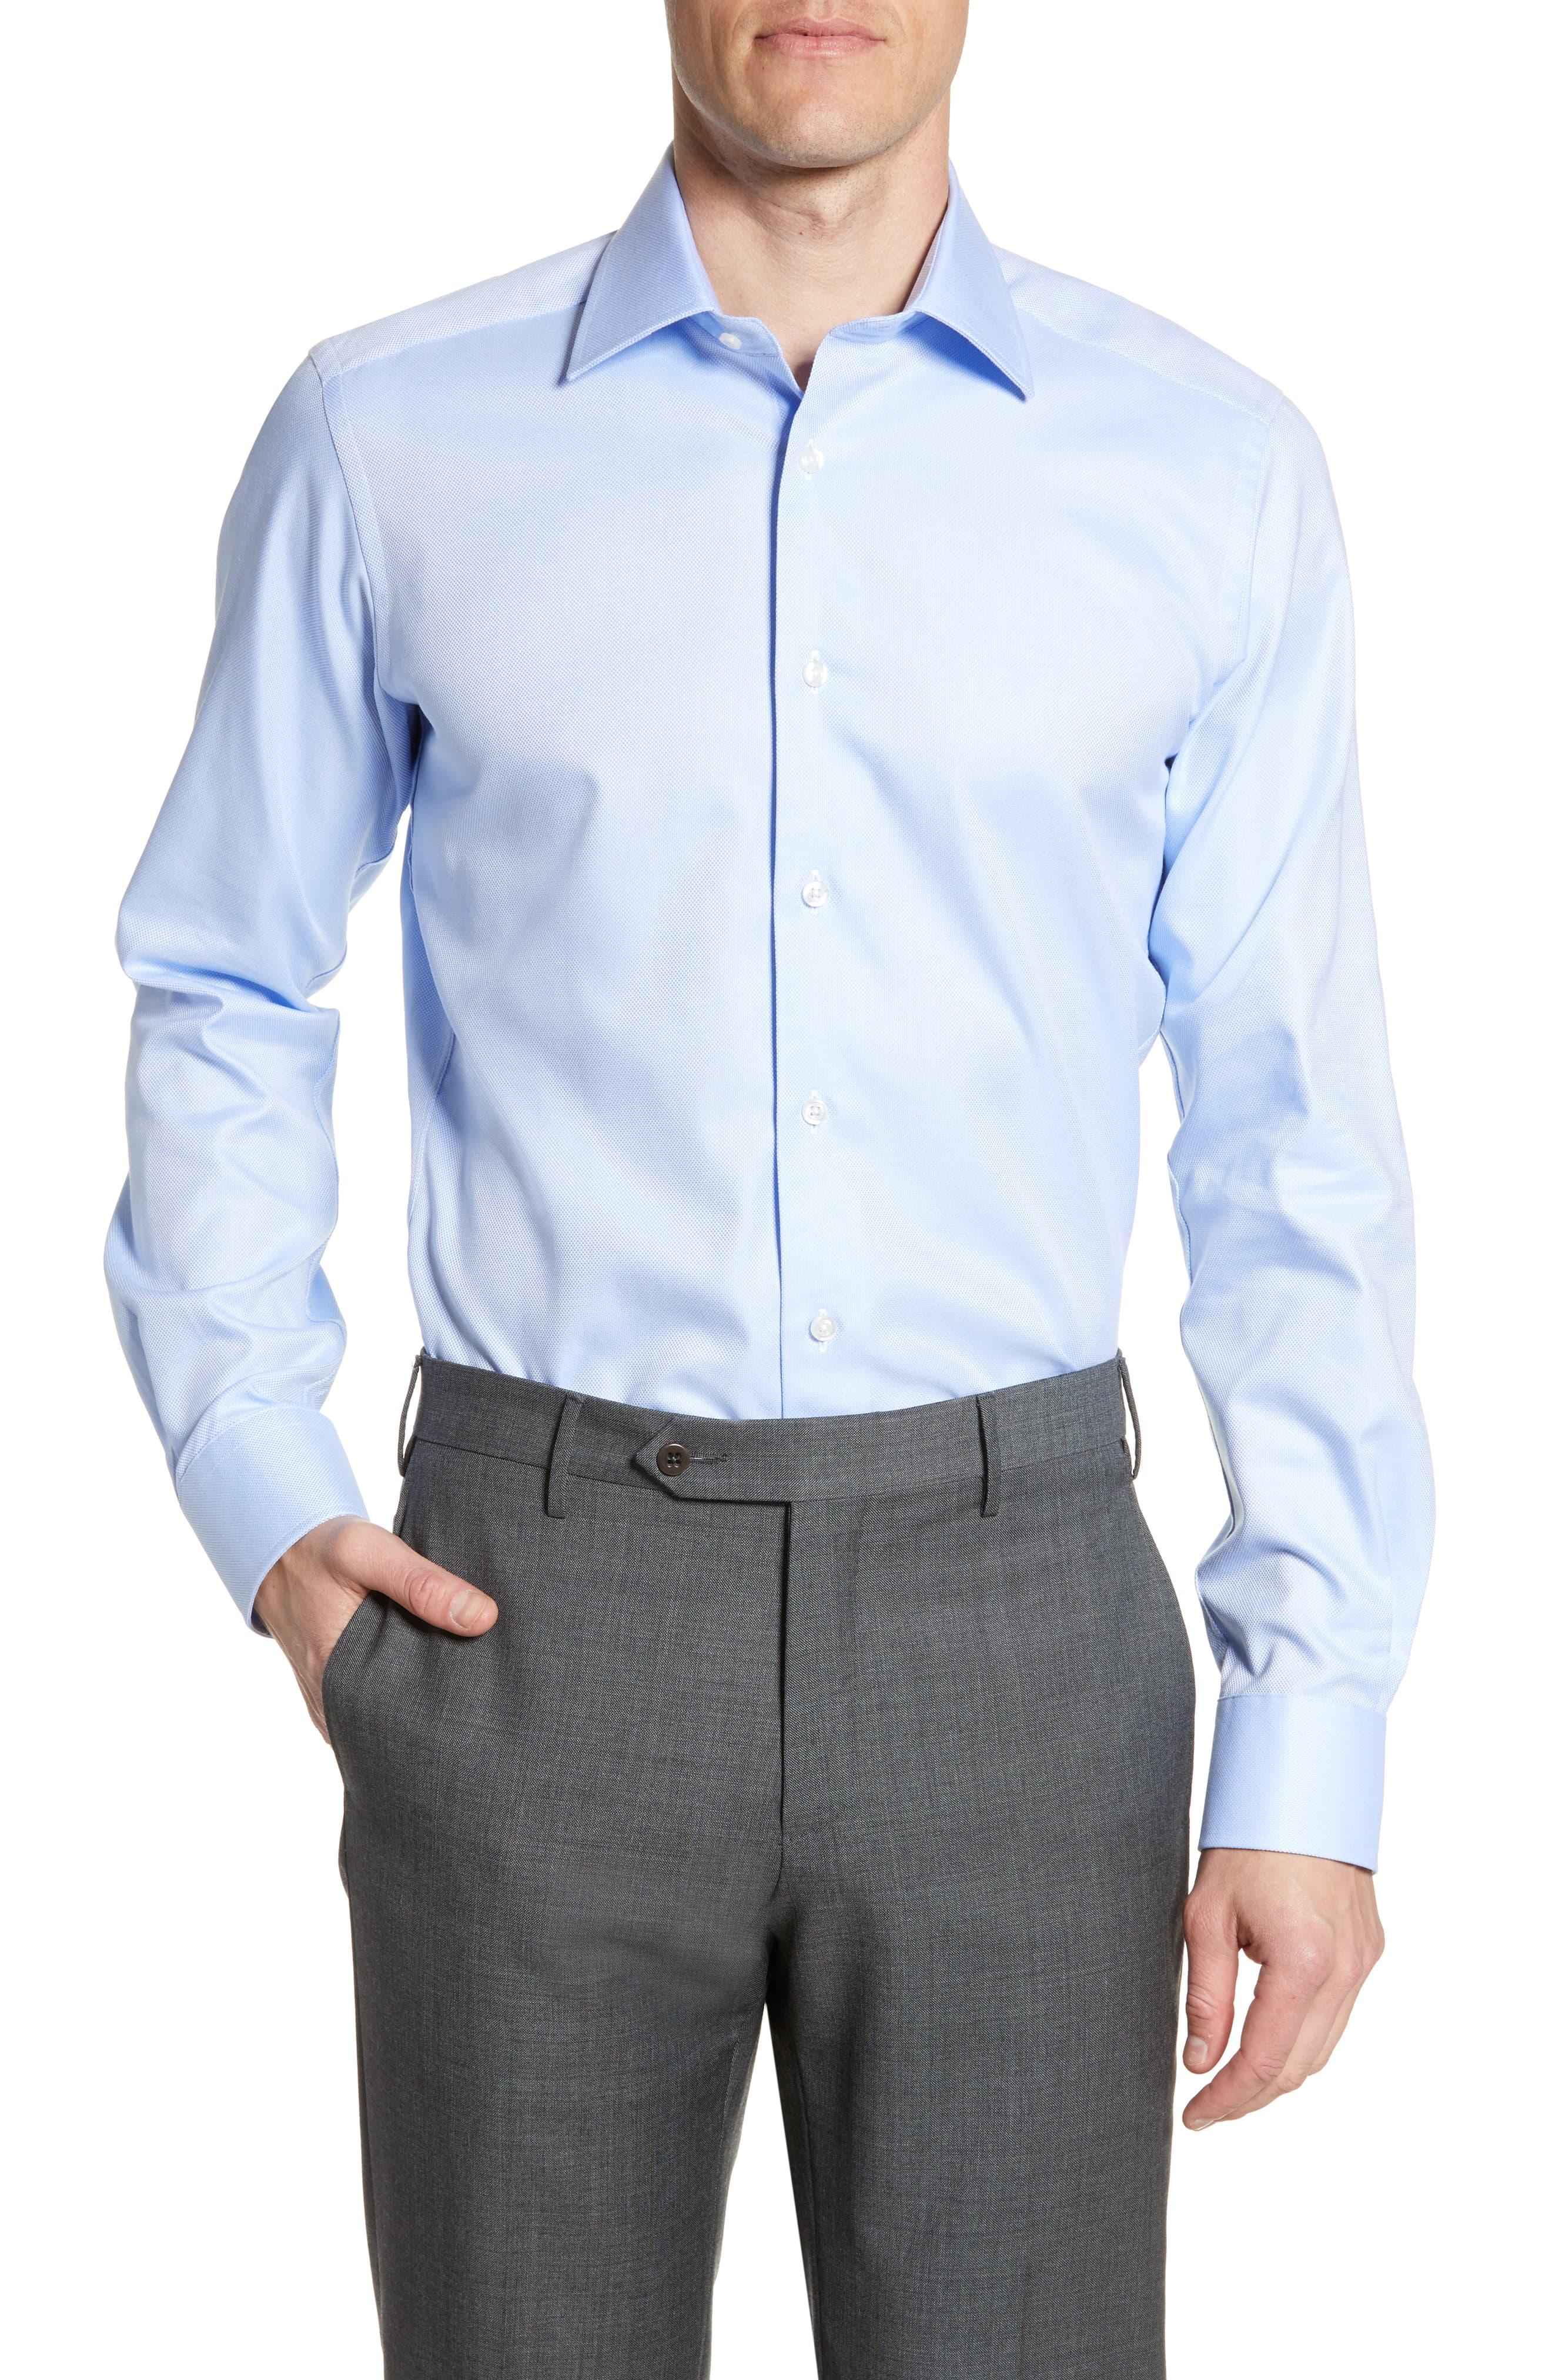 David Donahue Trim Fit Dress Shirt in Blue for Men - Save 7% - Lyst